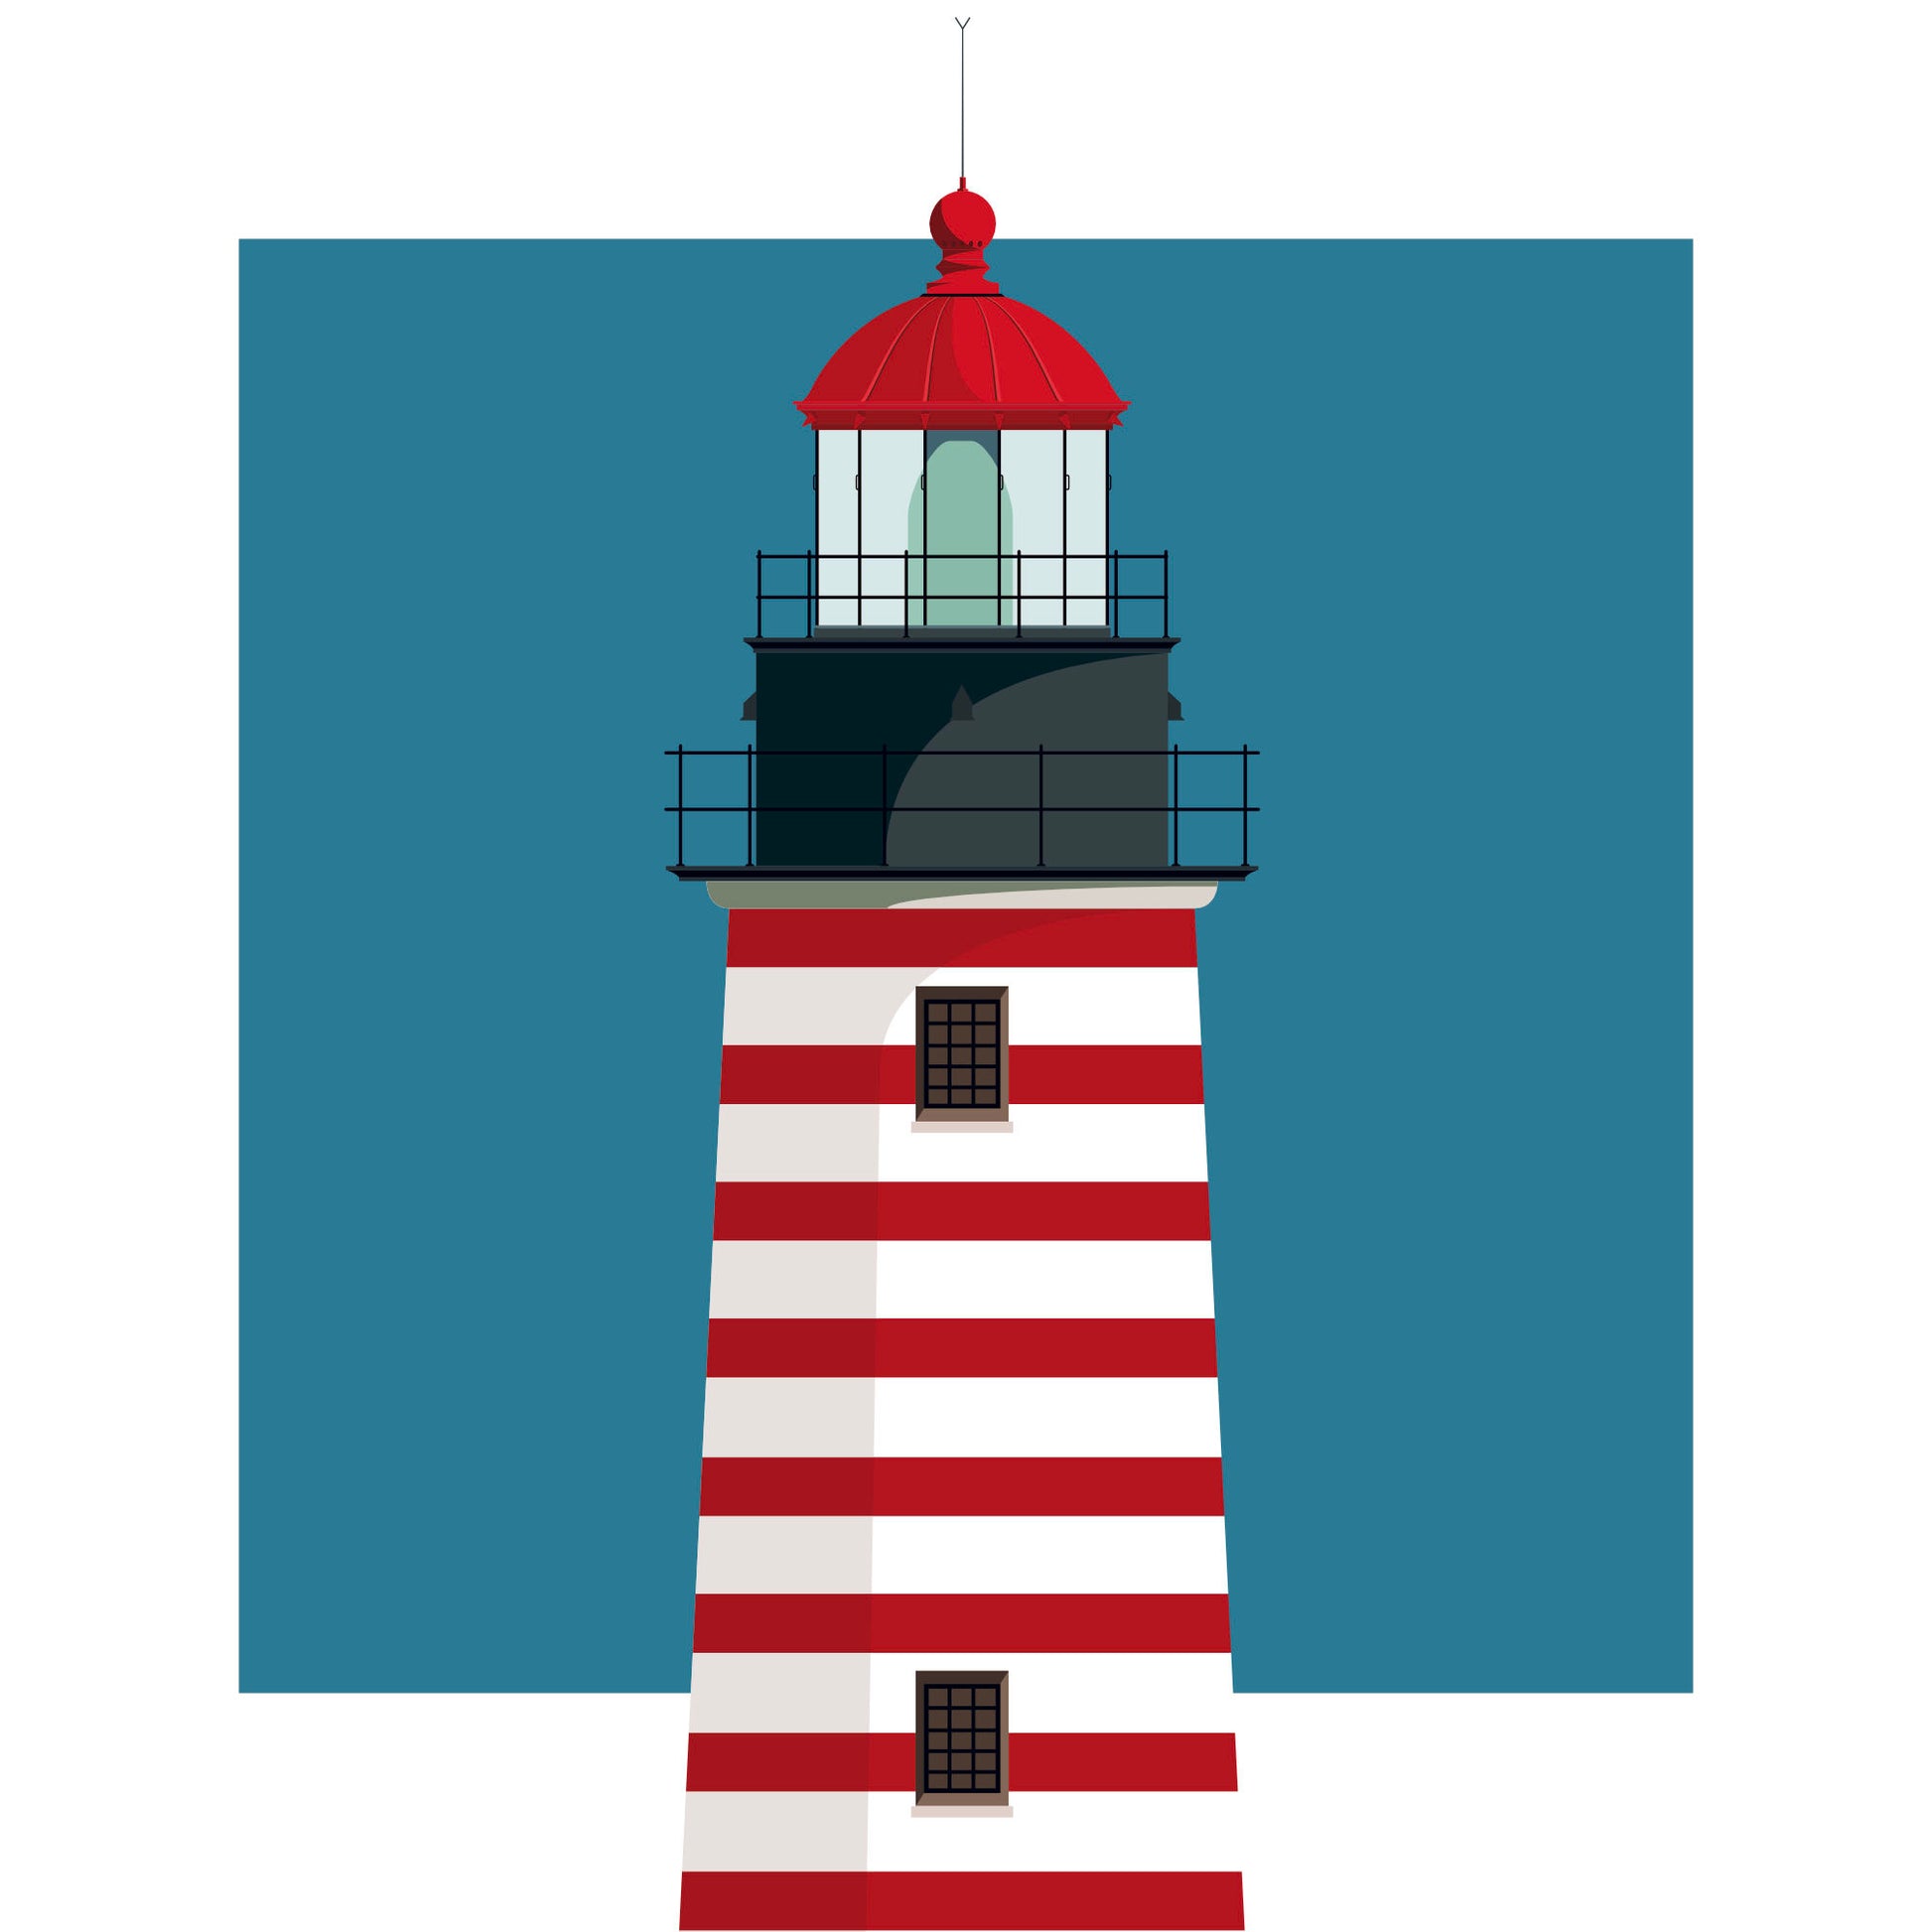 Illustration of the West Quoddy Head lighthouse, Maine, USA. On a white background with aqua blue square as a backdrop.